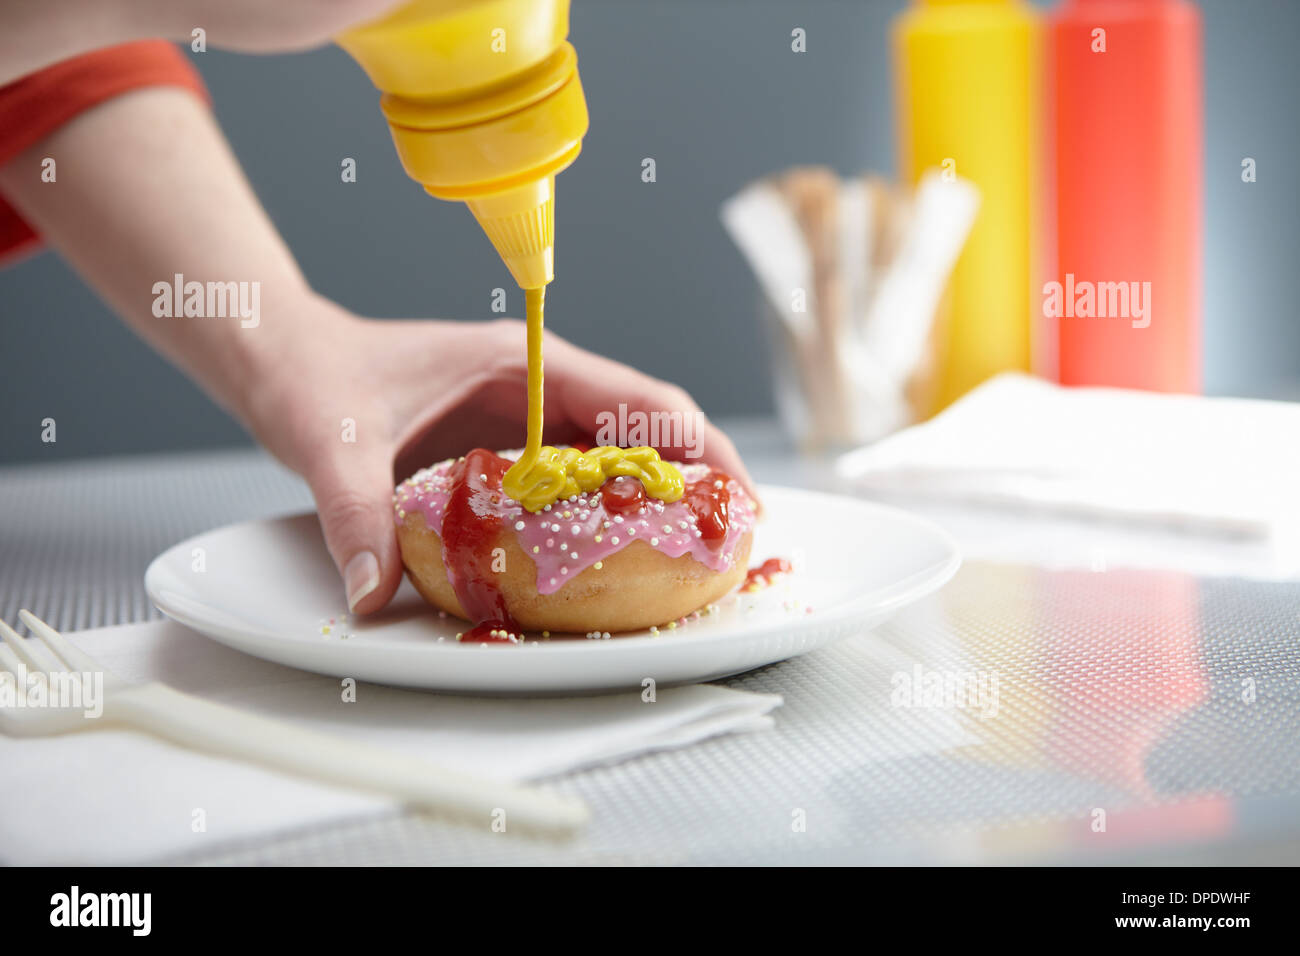 Woman squirting donut with ketchup and mustard Stock Photo